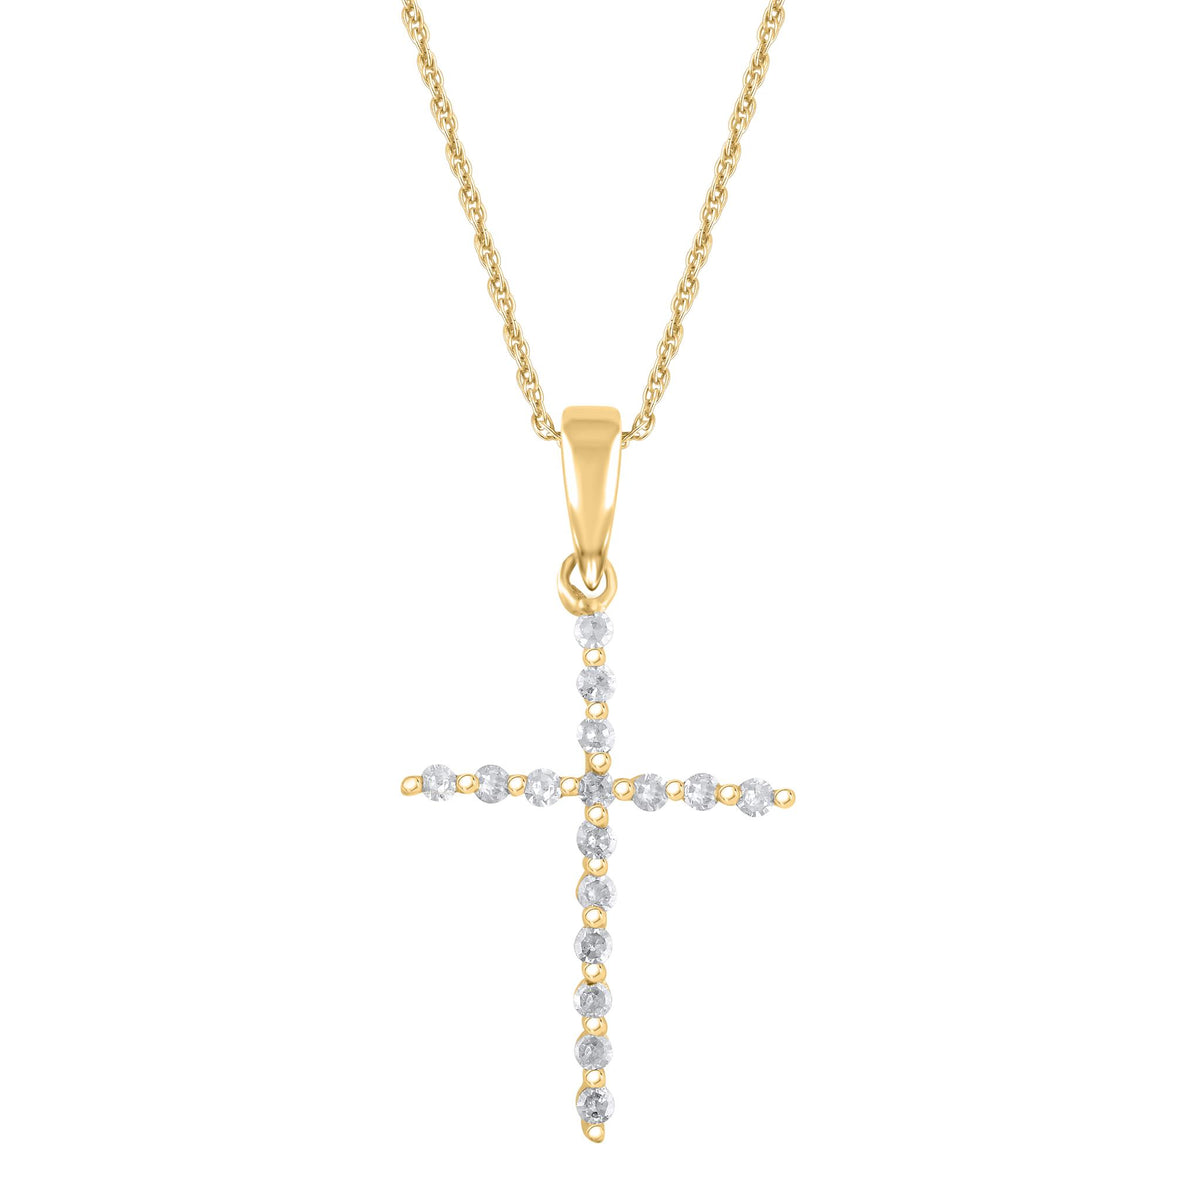 14Kt Yellow Gold Cross Pendant with .10cttw Natural Diamonds on an 18" Cable Chain